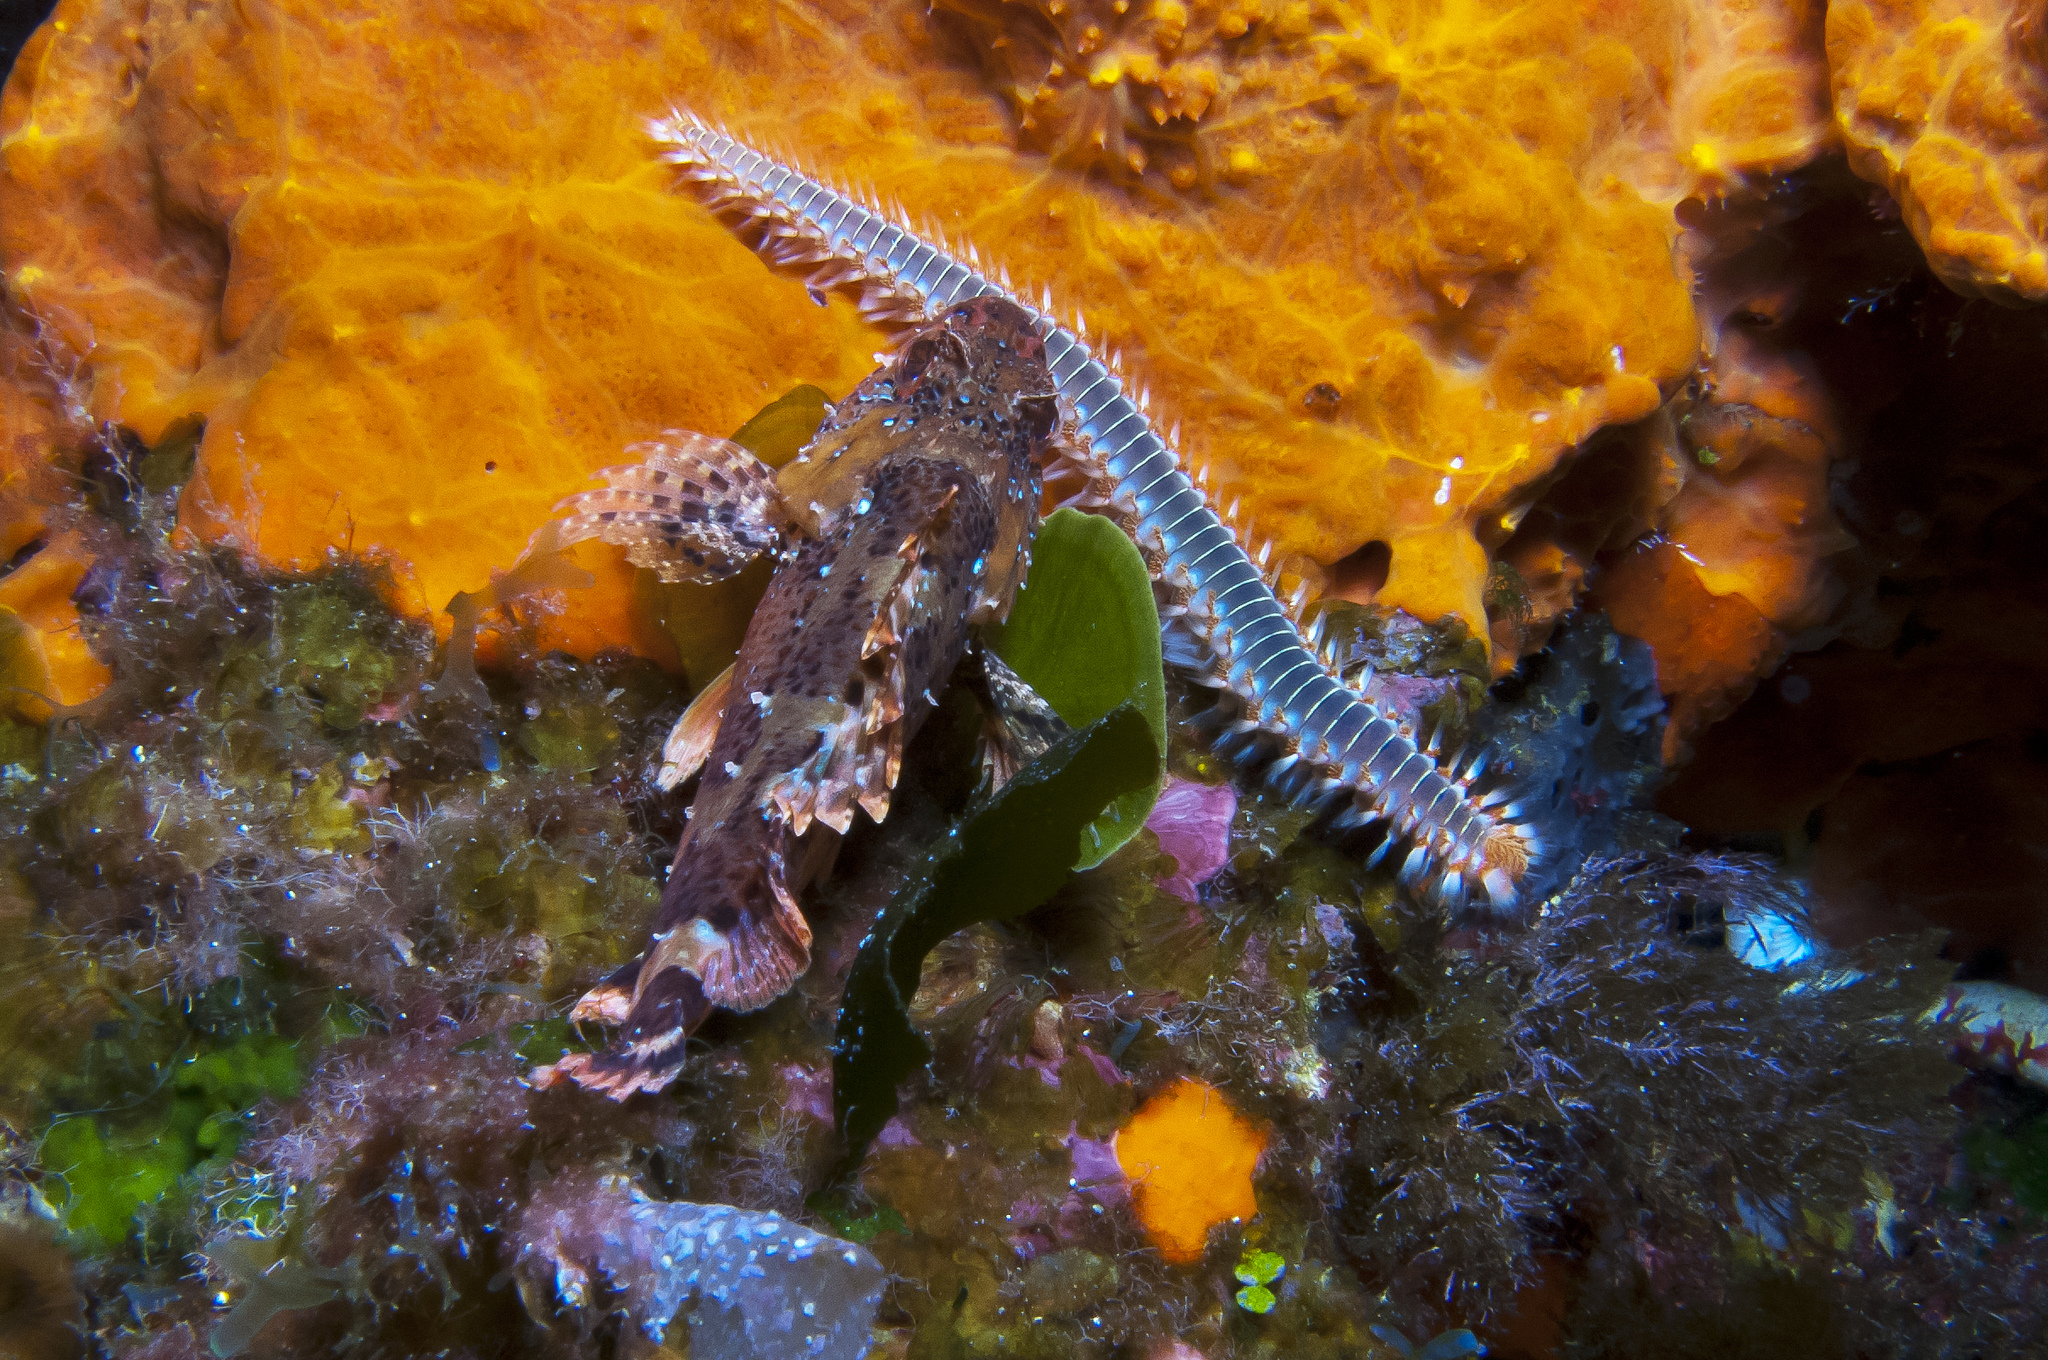 Scorpionfish and Bristleworm by Flickr/Silke Baron